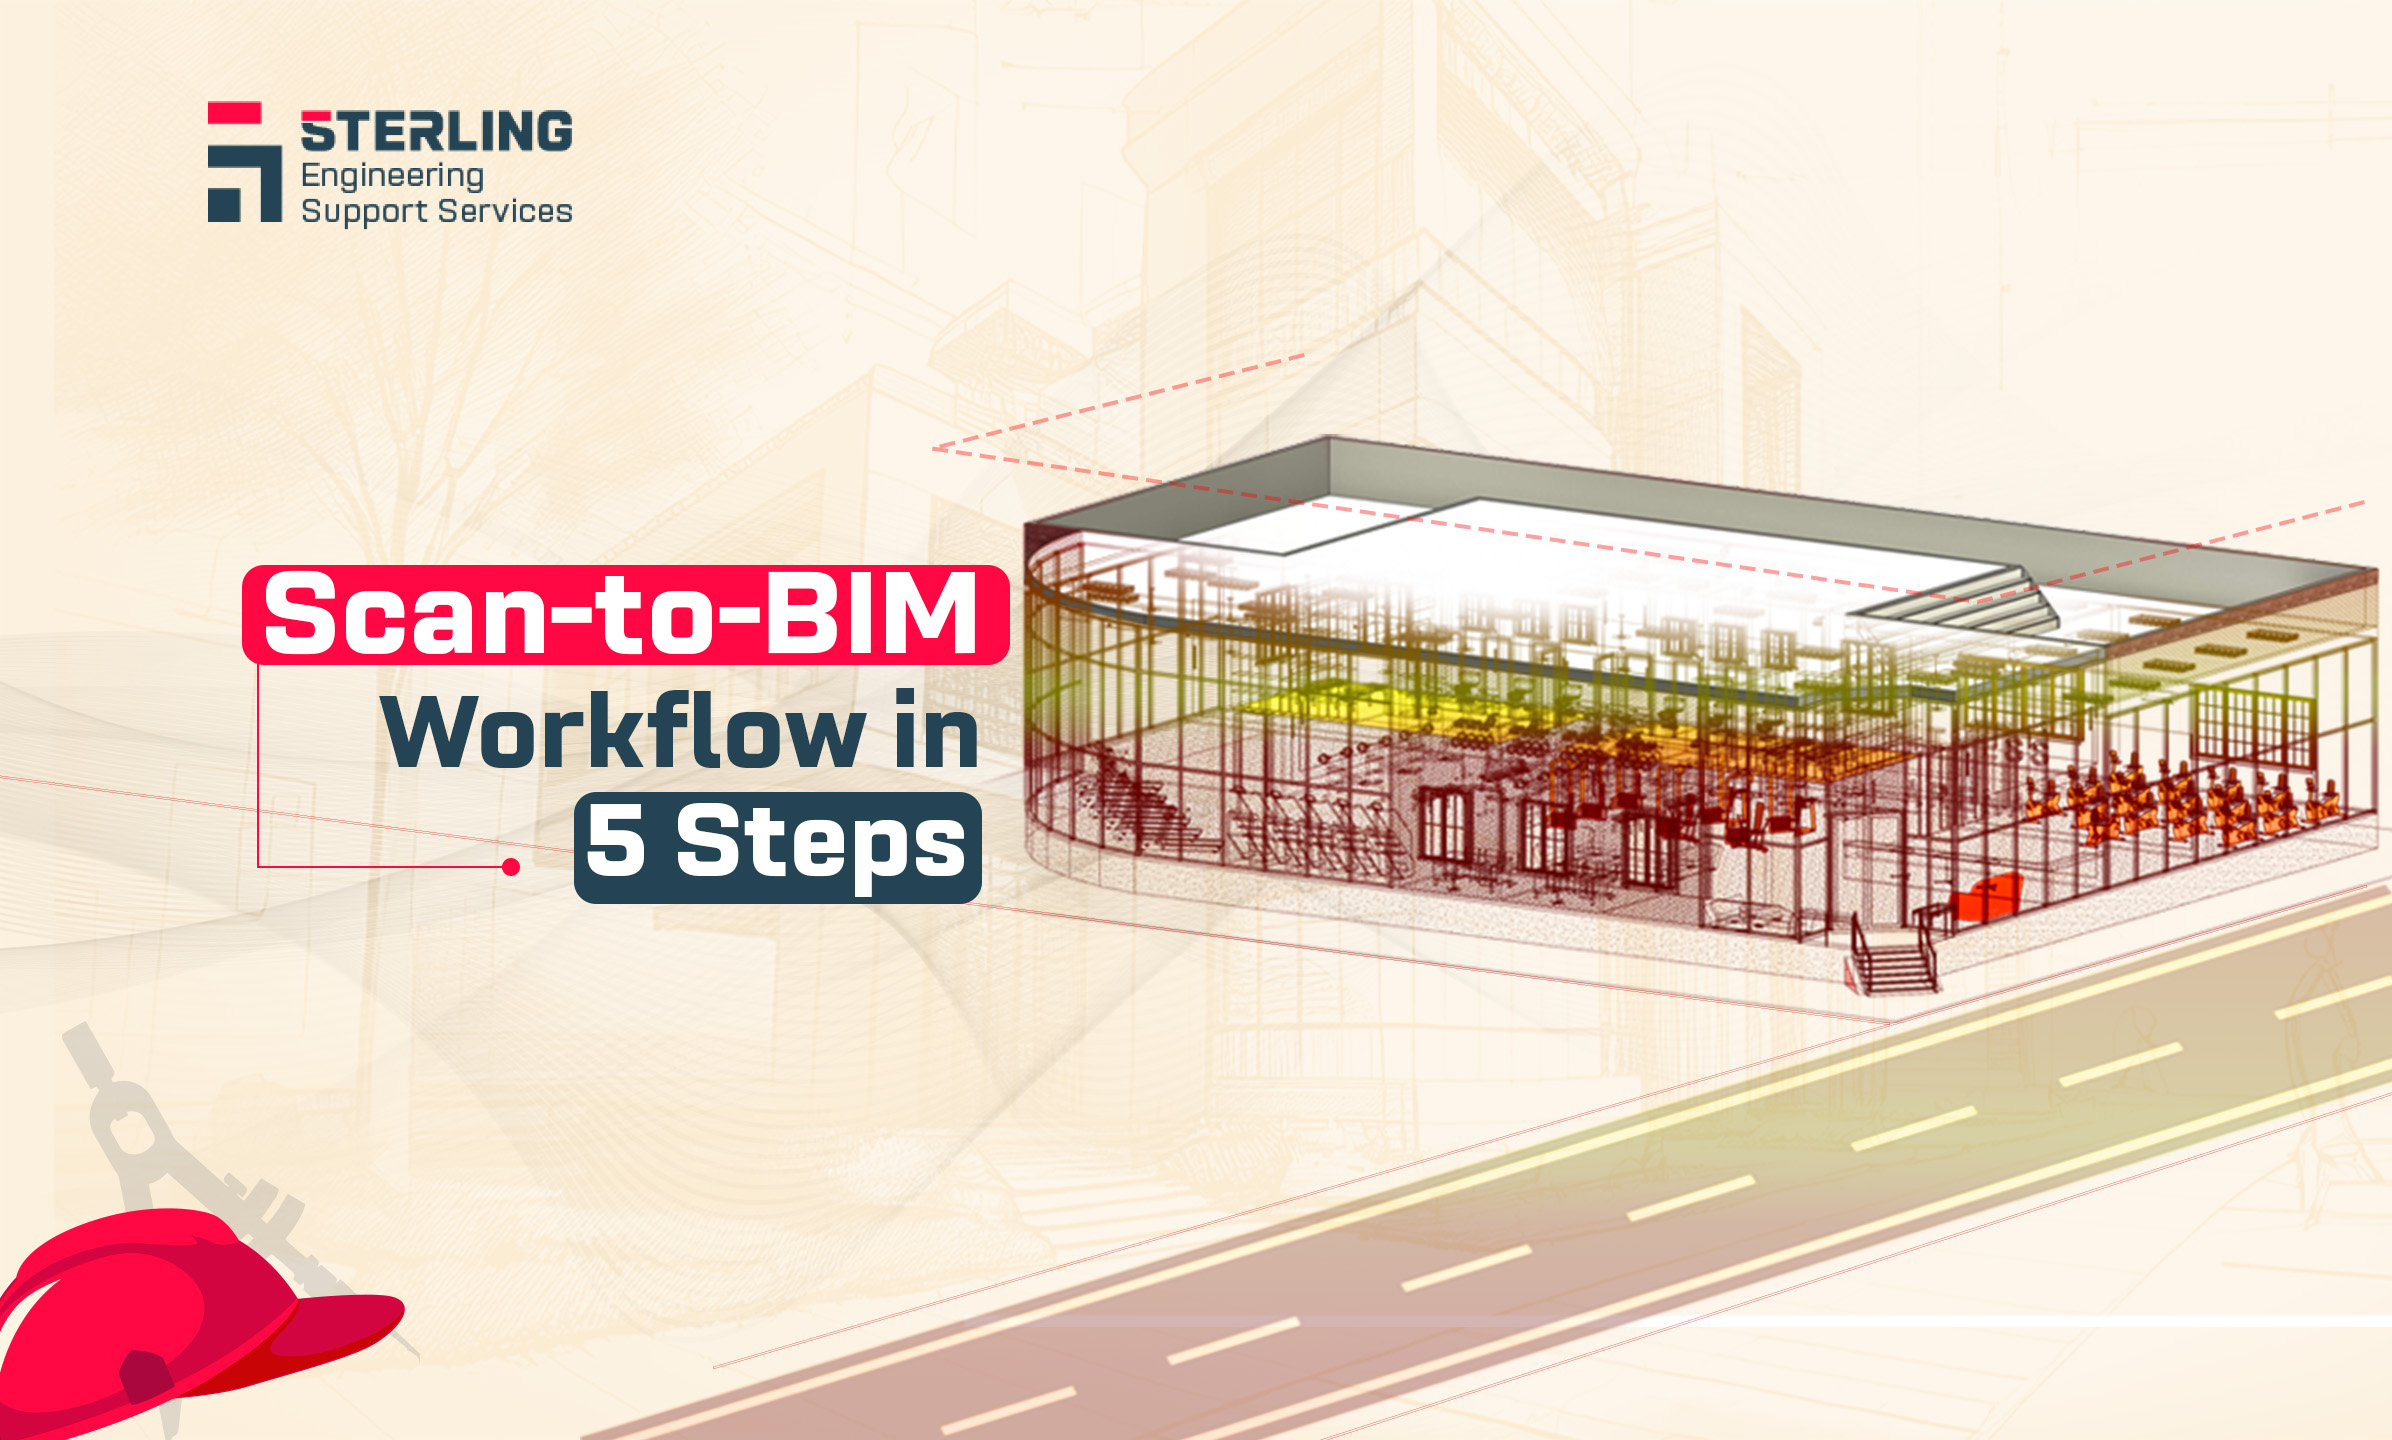 Scan-to-BIM Workflow in 5 Steps